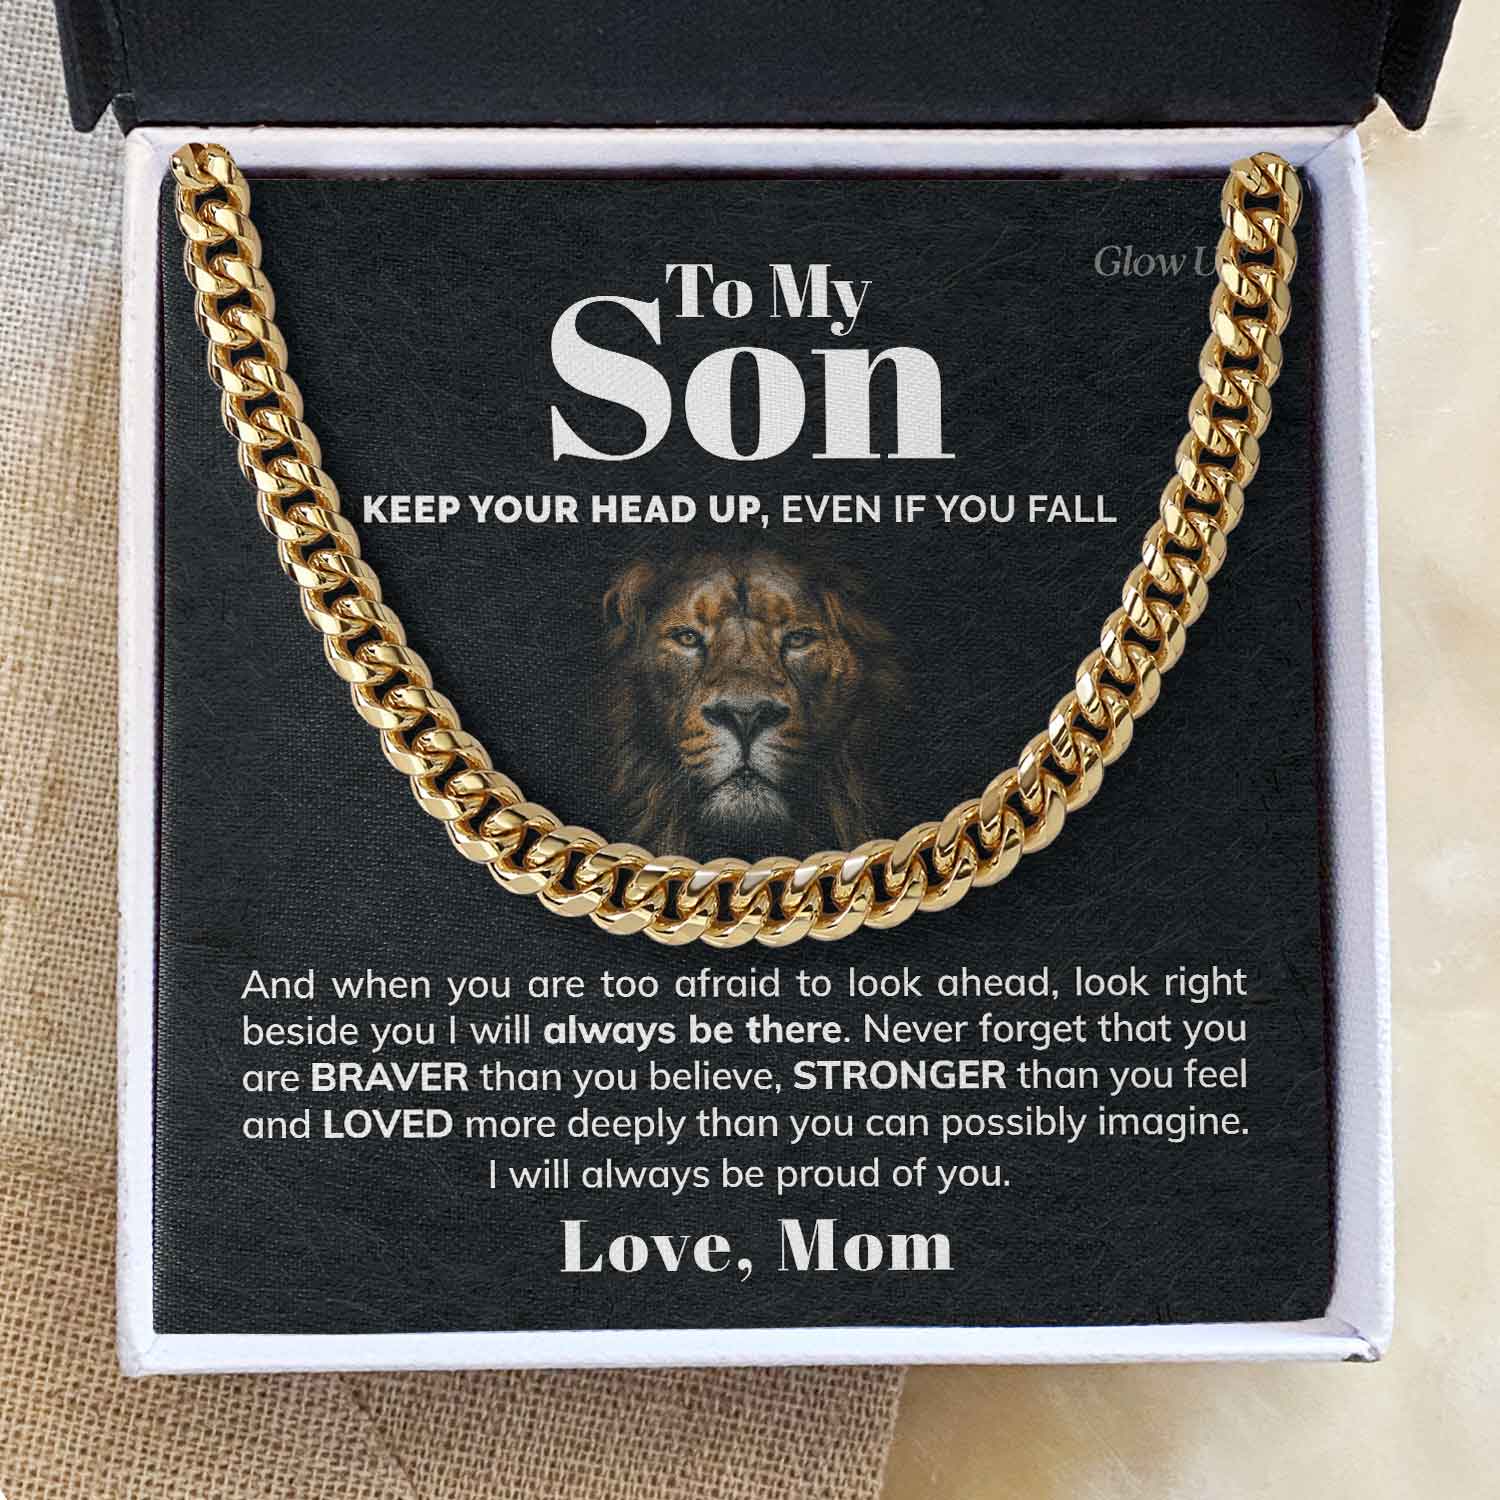 ShineOn Fulfillment Jewelry 14K Yellow Gold Finish / Two-Toned Box To My Son - I'll always be proud of you - Cuban Link Chain